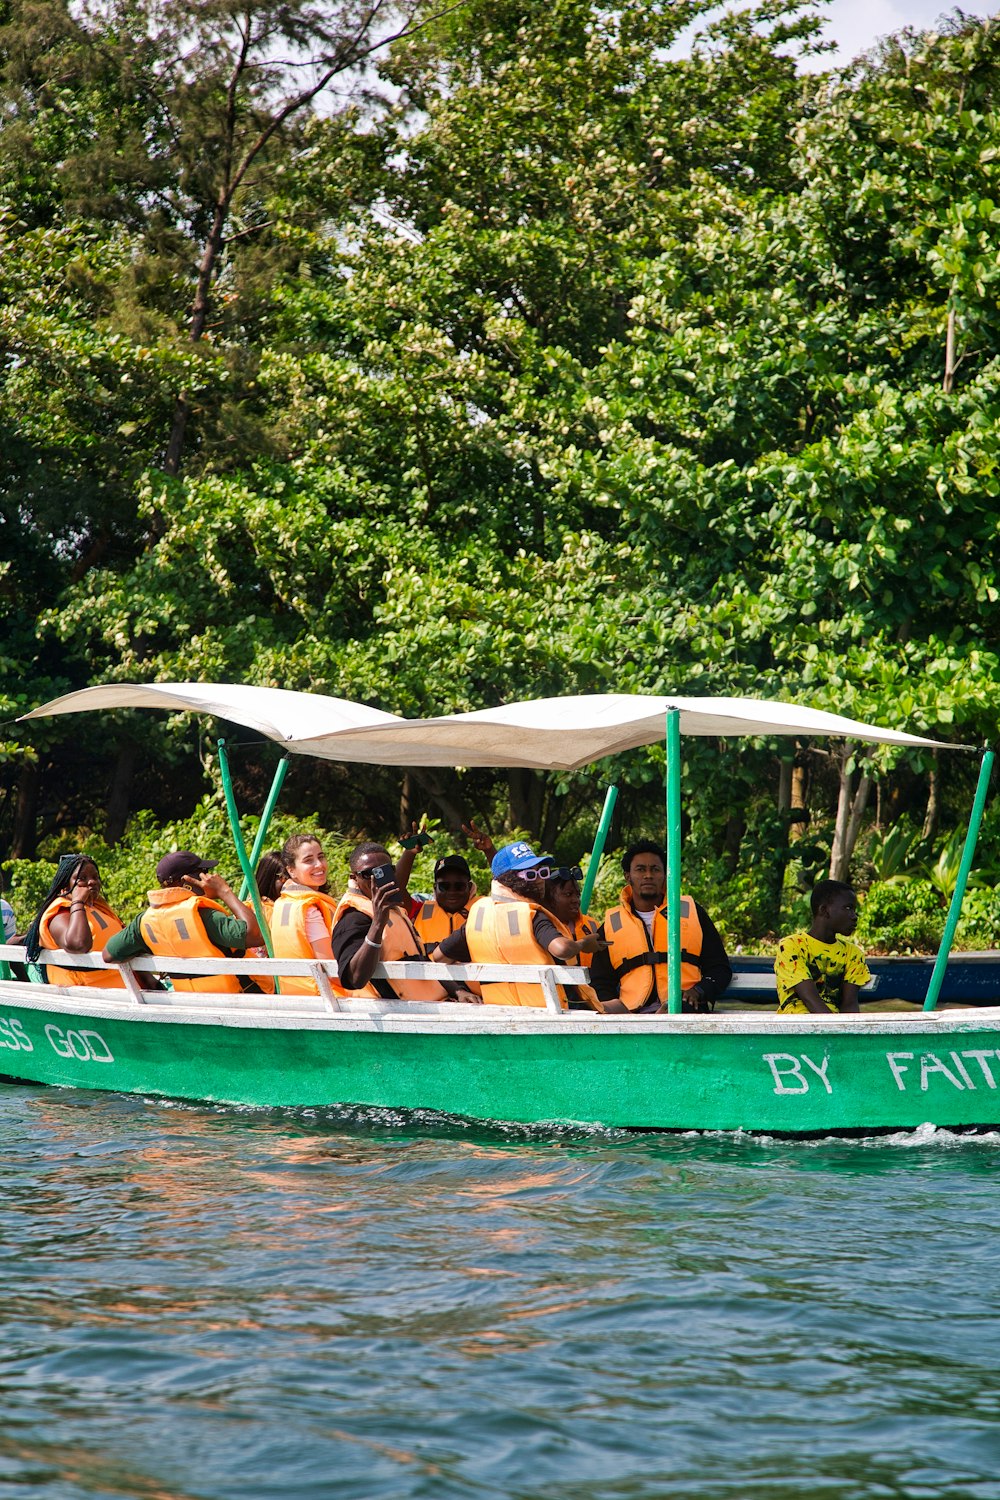 a group of people riding on a green boat